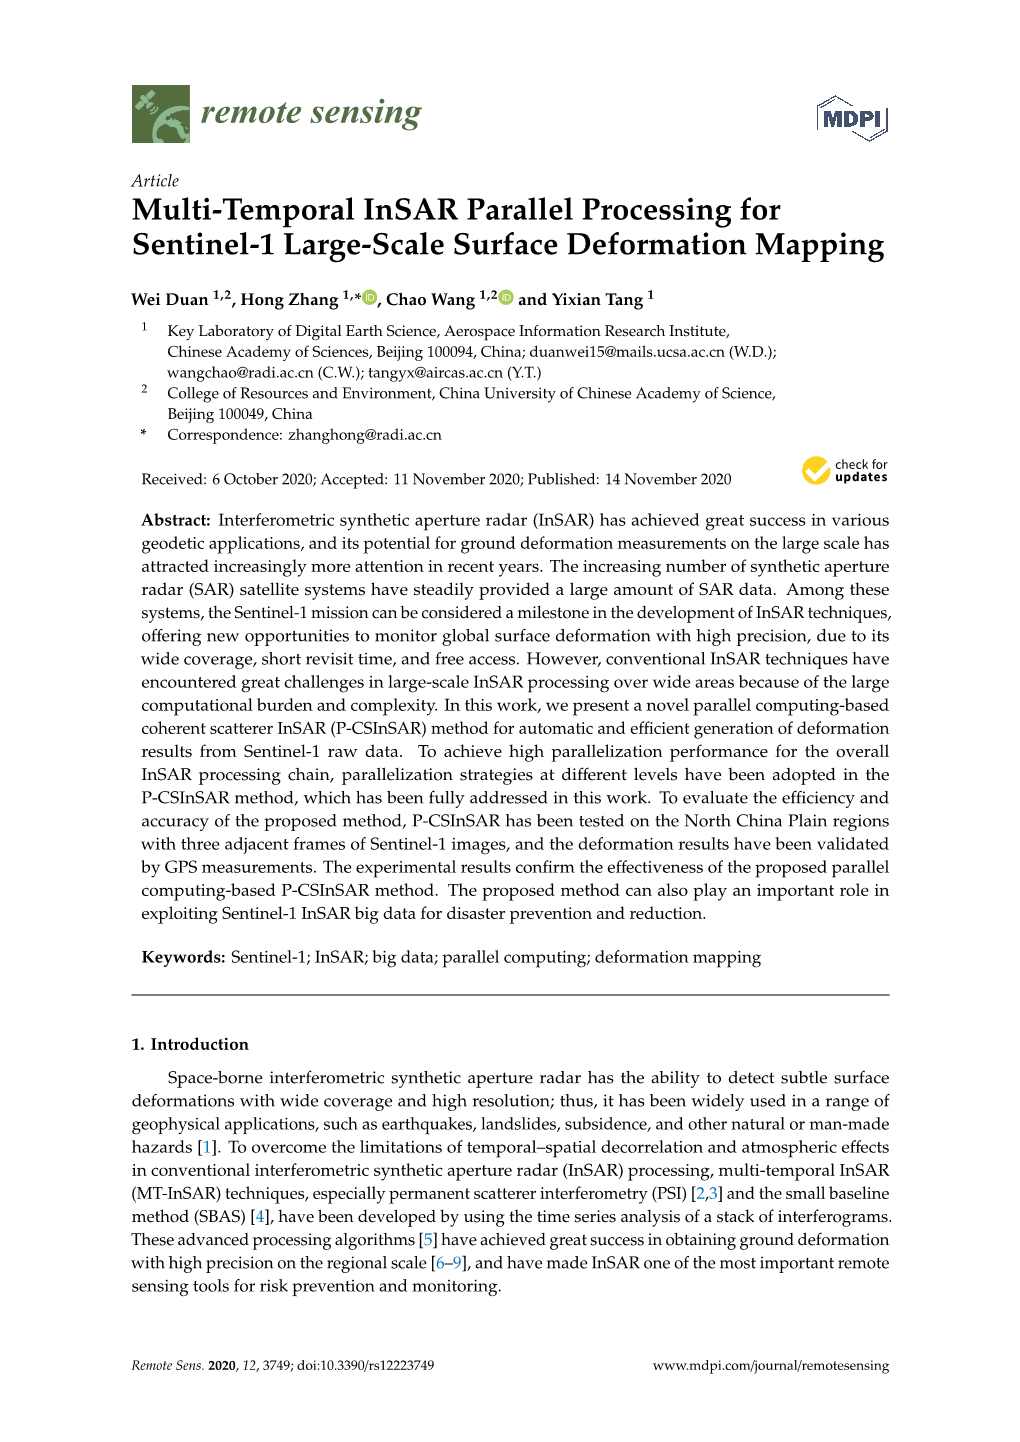 Multi-Temporal Insar Parallel Processing for Sentinel-1 Large-Scale Surface Deformation Mapping